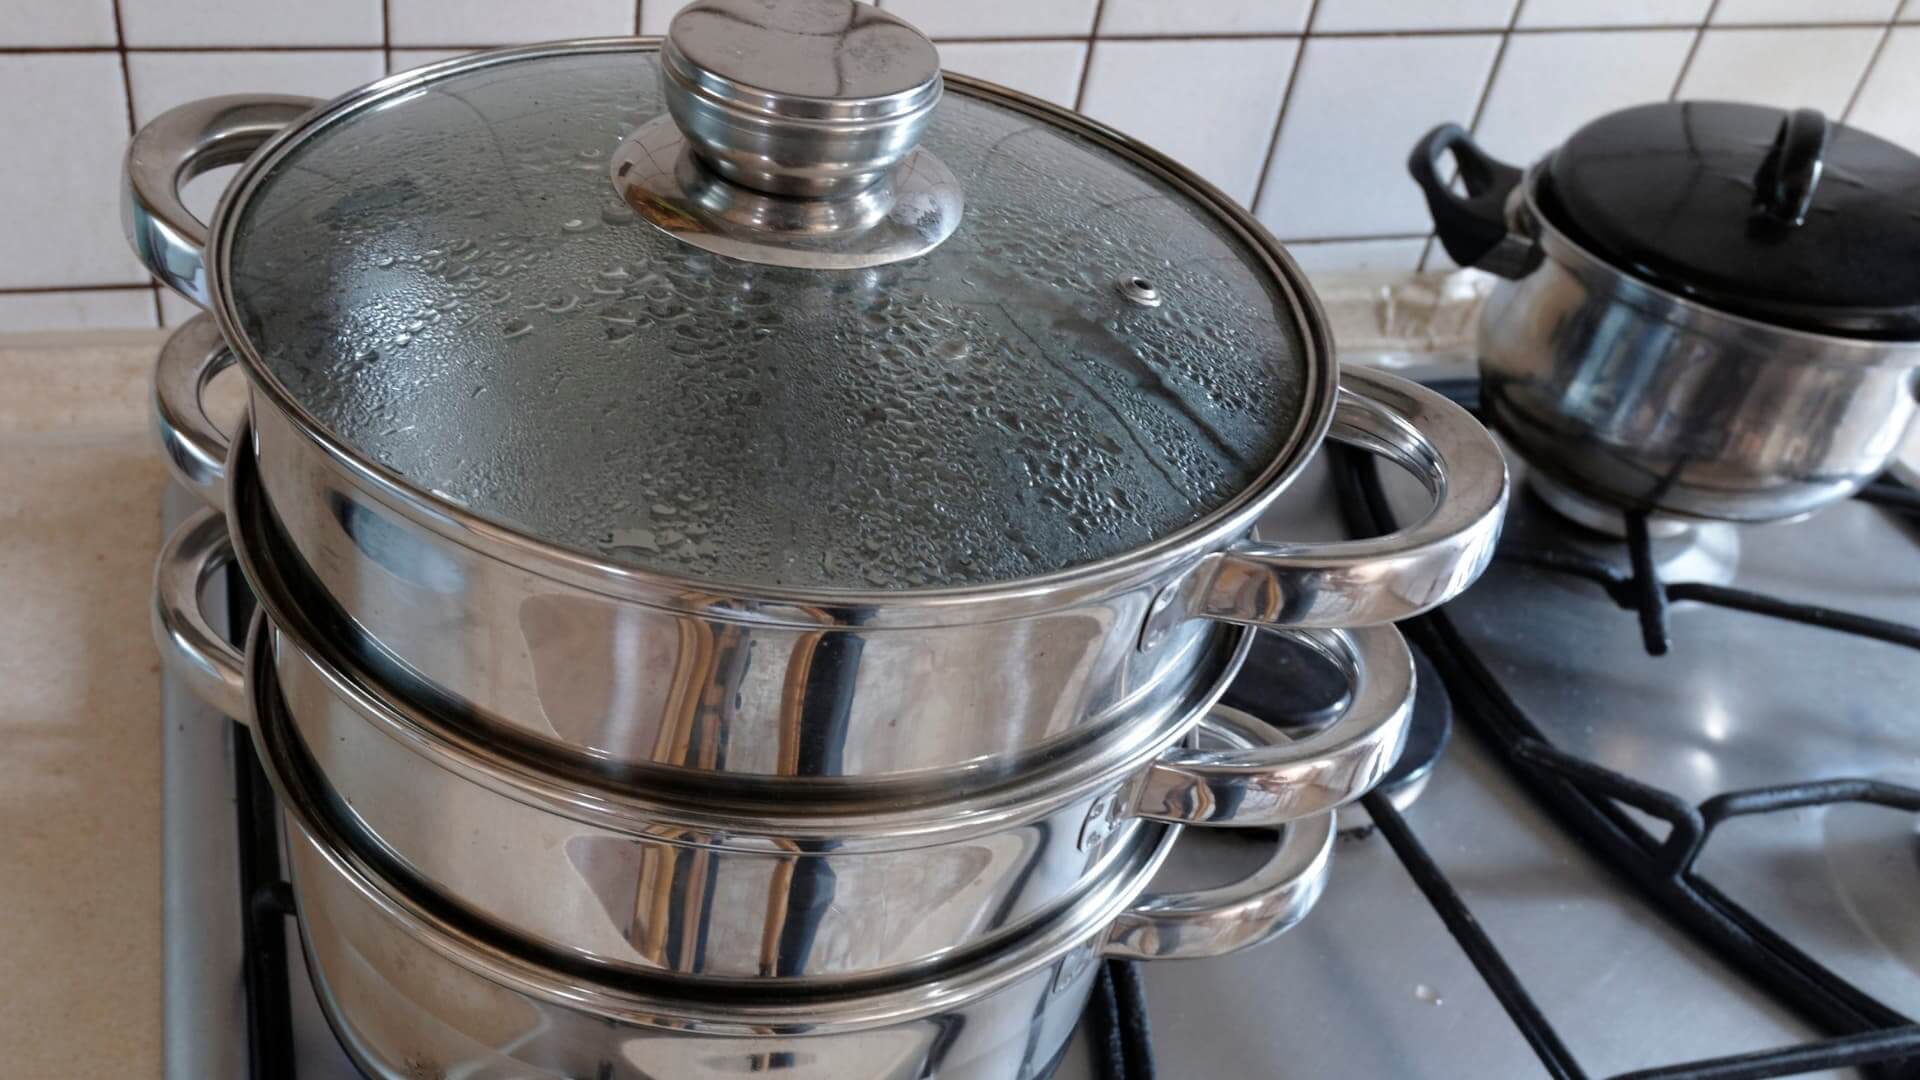 what is waterless cookware